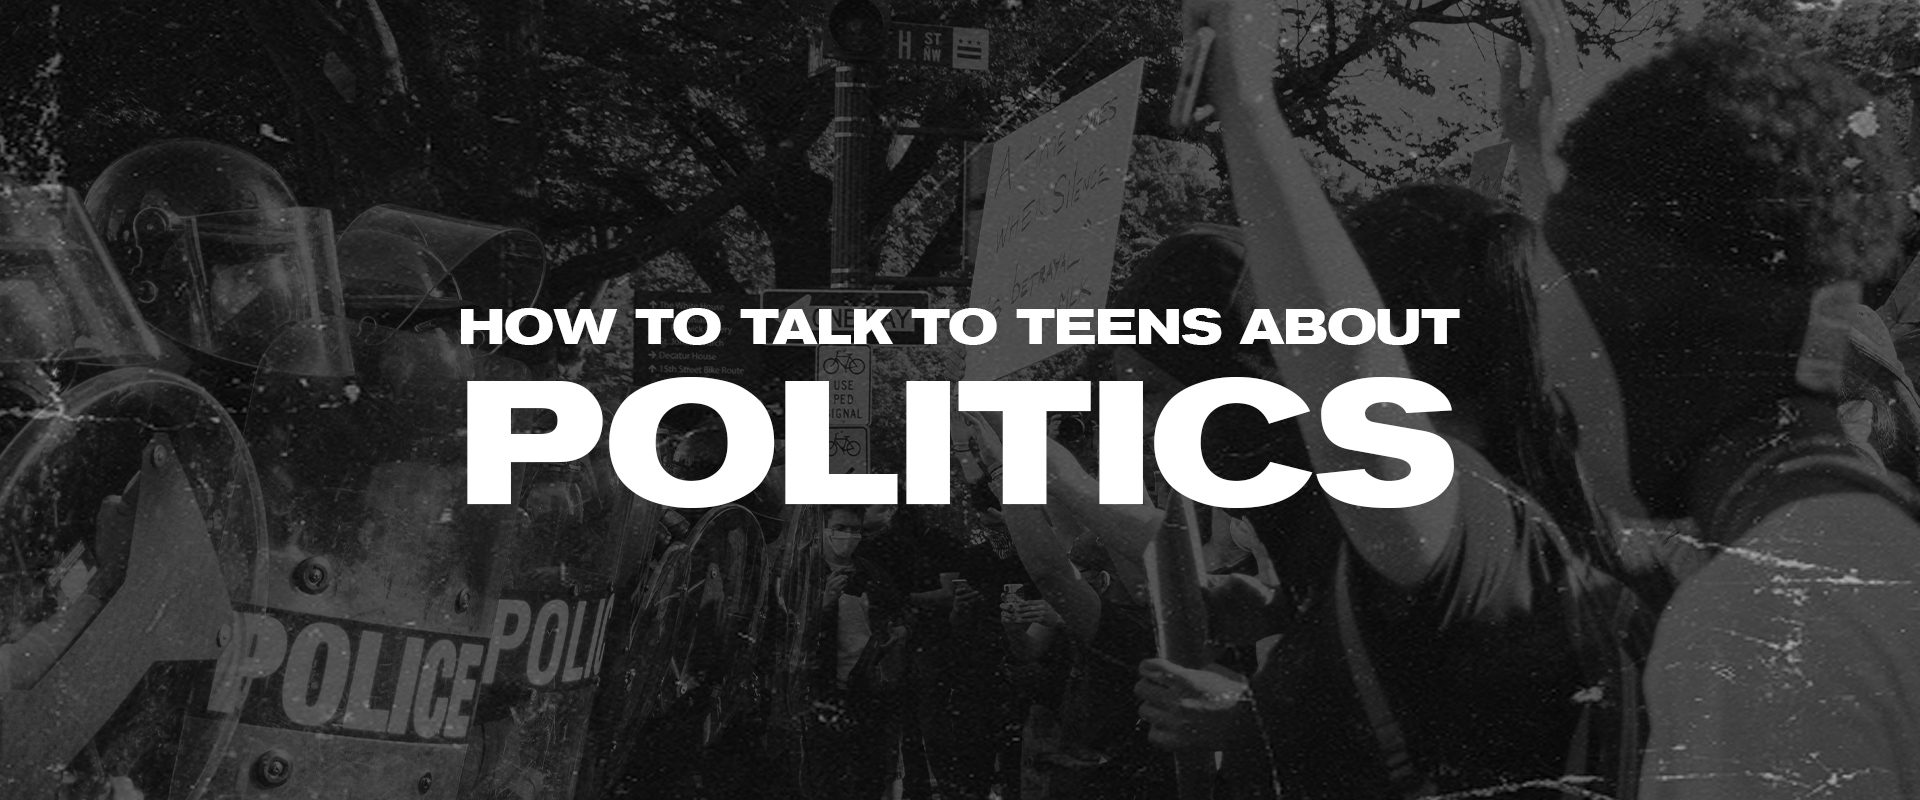 How To Talk To Teens About Politics